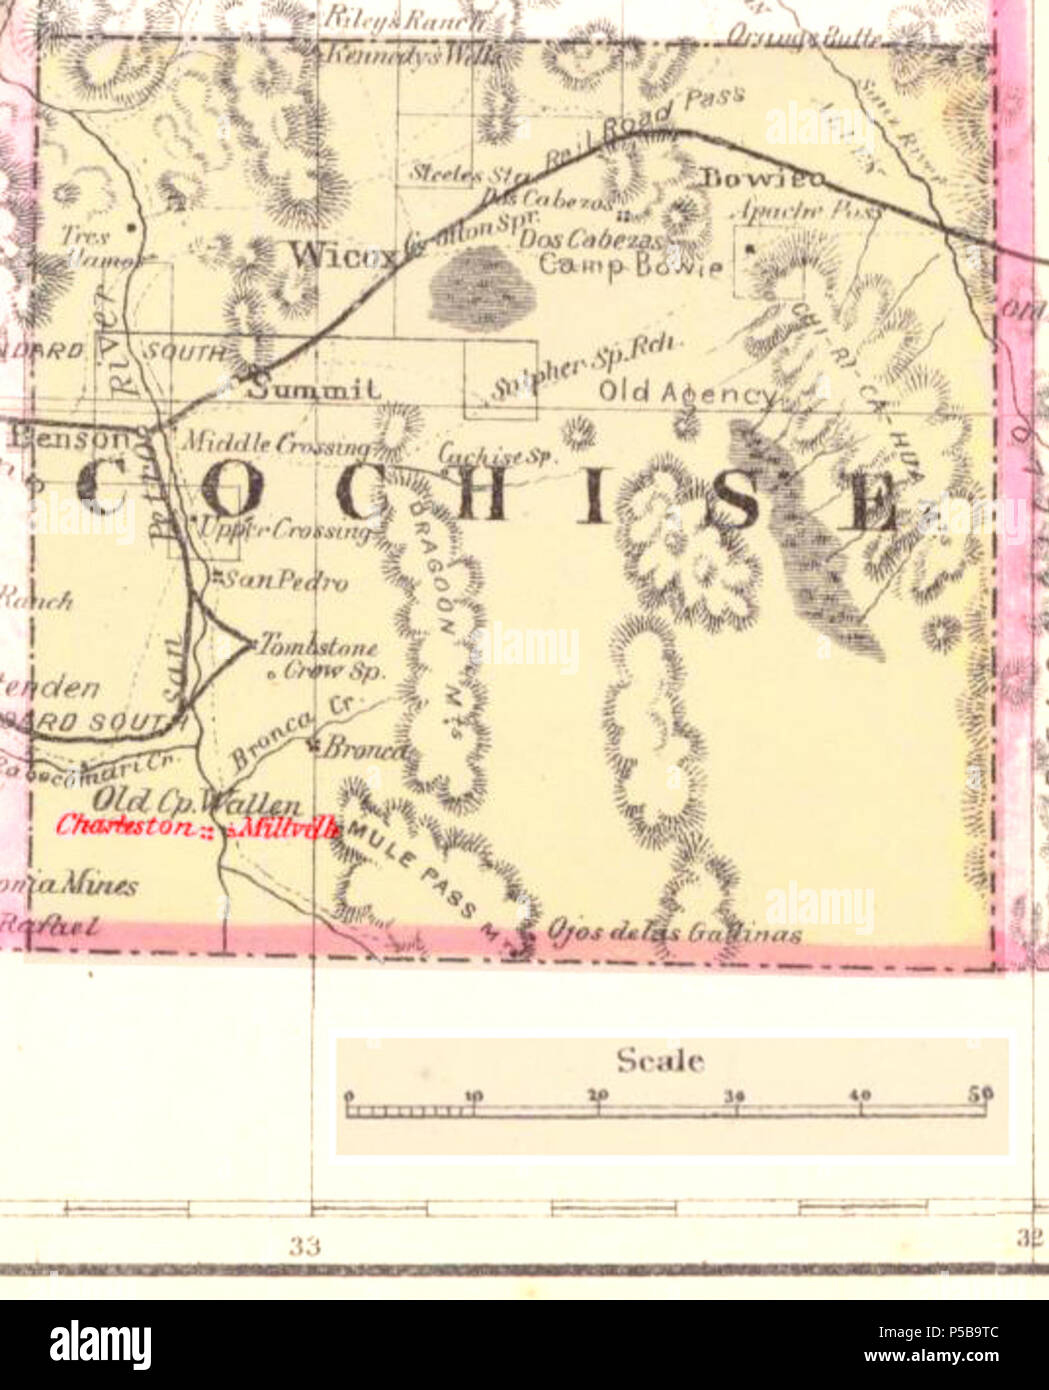 N/A. English: Portion of County and Township Map of Arizona and New Mexico. 1882.   Samuel Augustus Mitchell  (1790–1868)    Description American cartographer  Date of birth/death 1792 20 December 1868  Location of birth/death Bristol Philadelphia  Authority control  : Q3445785 VIAF:72637097 ISNI:0000 0000 8344 6251 LCCN:n50036750 NLA:35057283 Open Library:OL6342775A WorldCat    (modified by Transity to crop to Cochise County, superimpose scale marker, and highlight Charleston and Millville) 359 Cochise County, Arizona 1882 (Charleston-Millville) Stock Photo